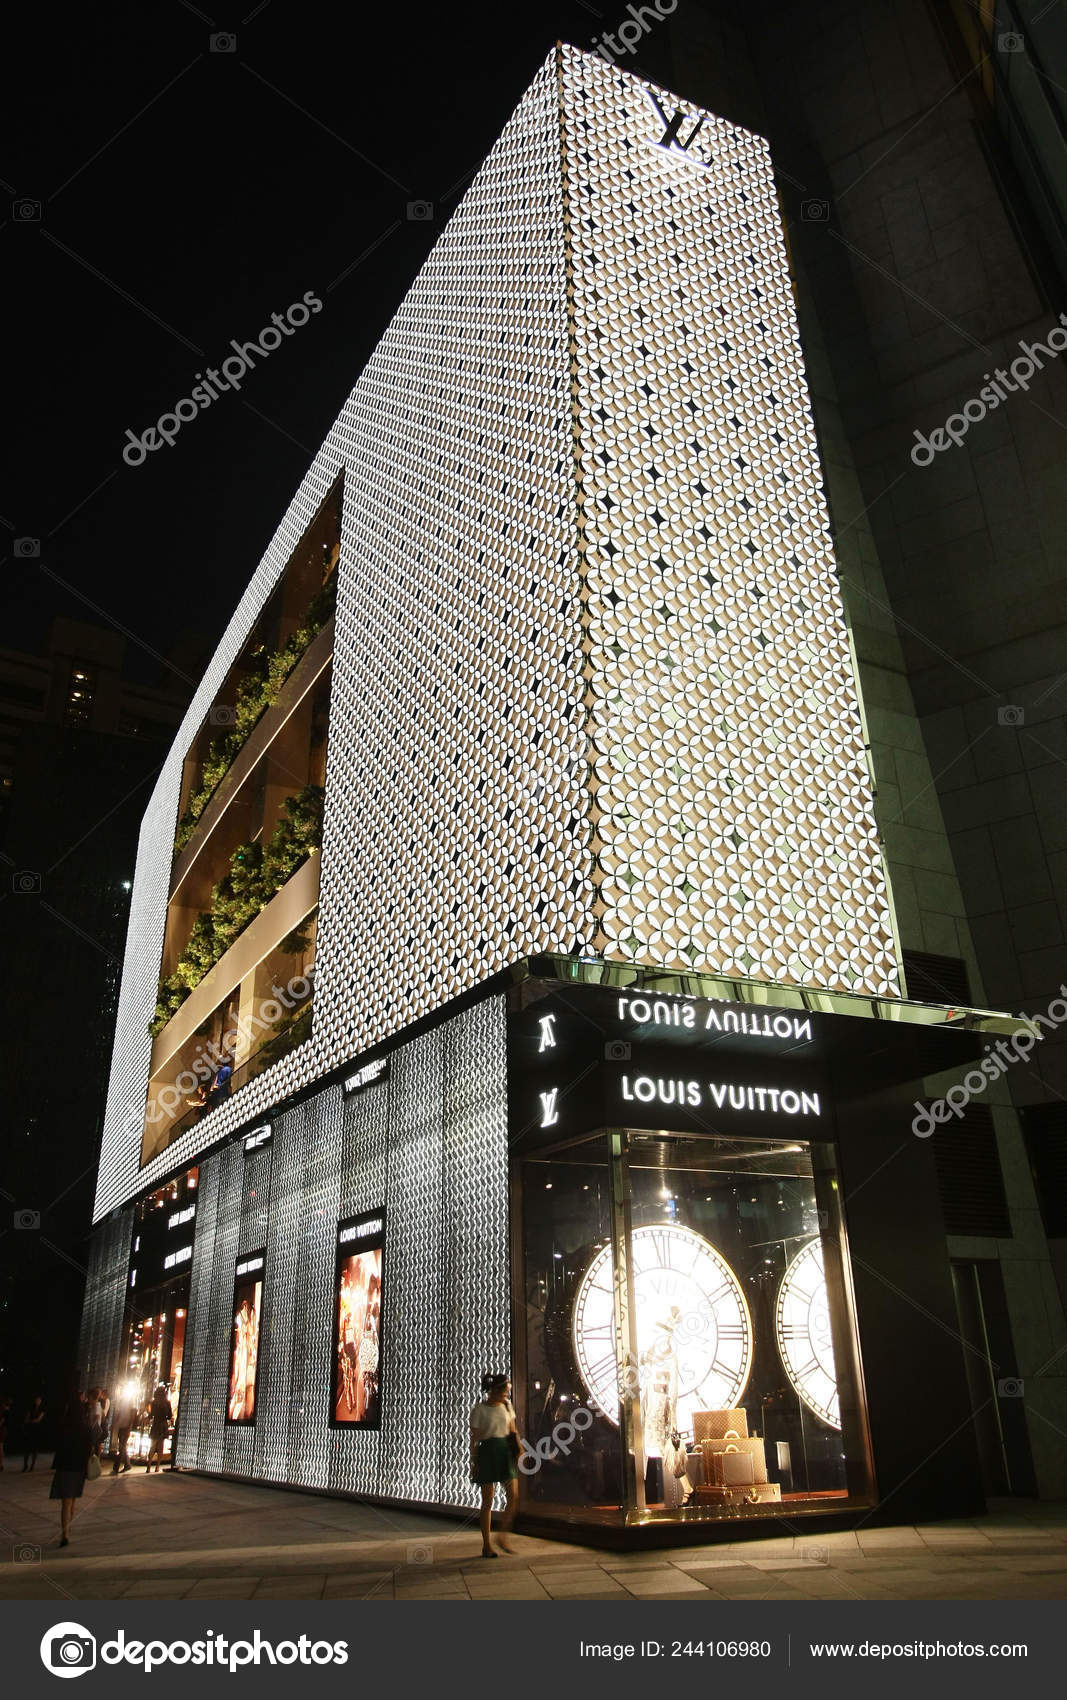 View of the headquarters building of LVMH China, also known as the